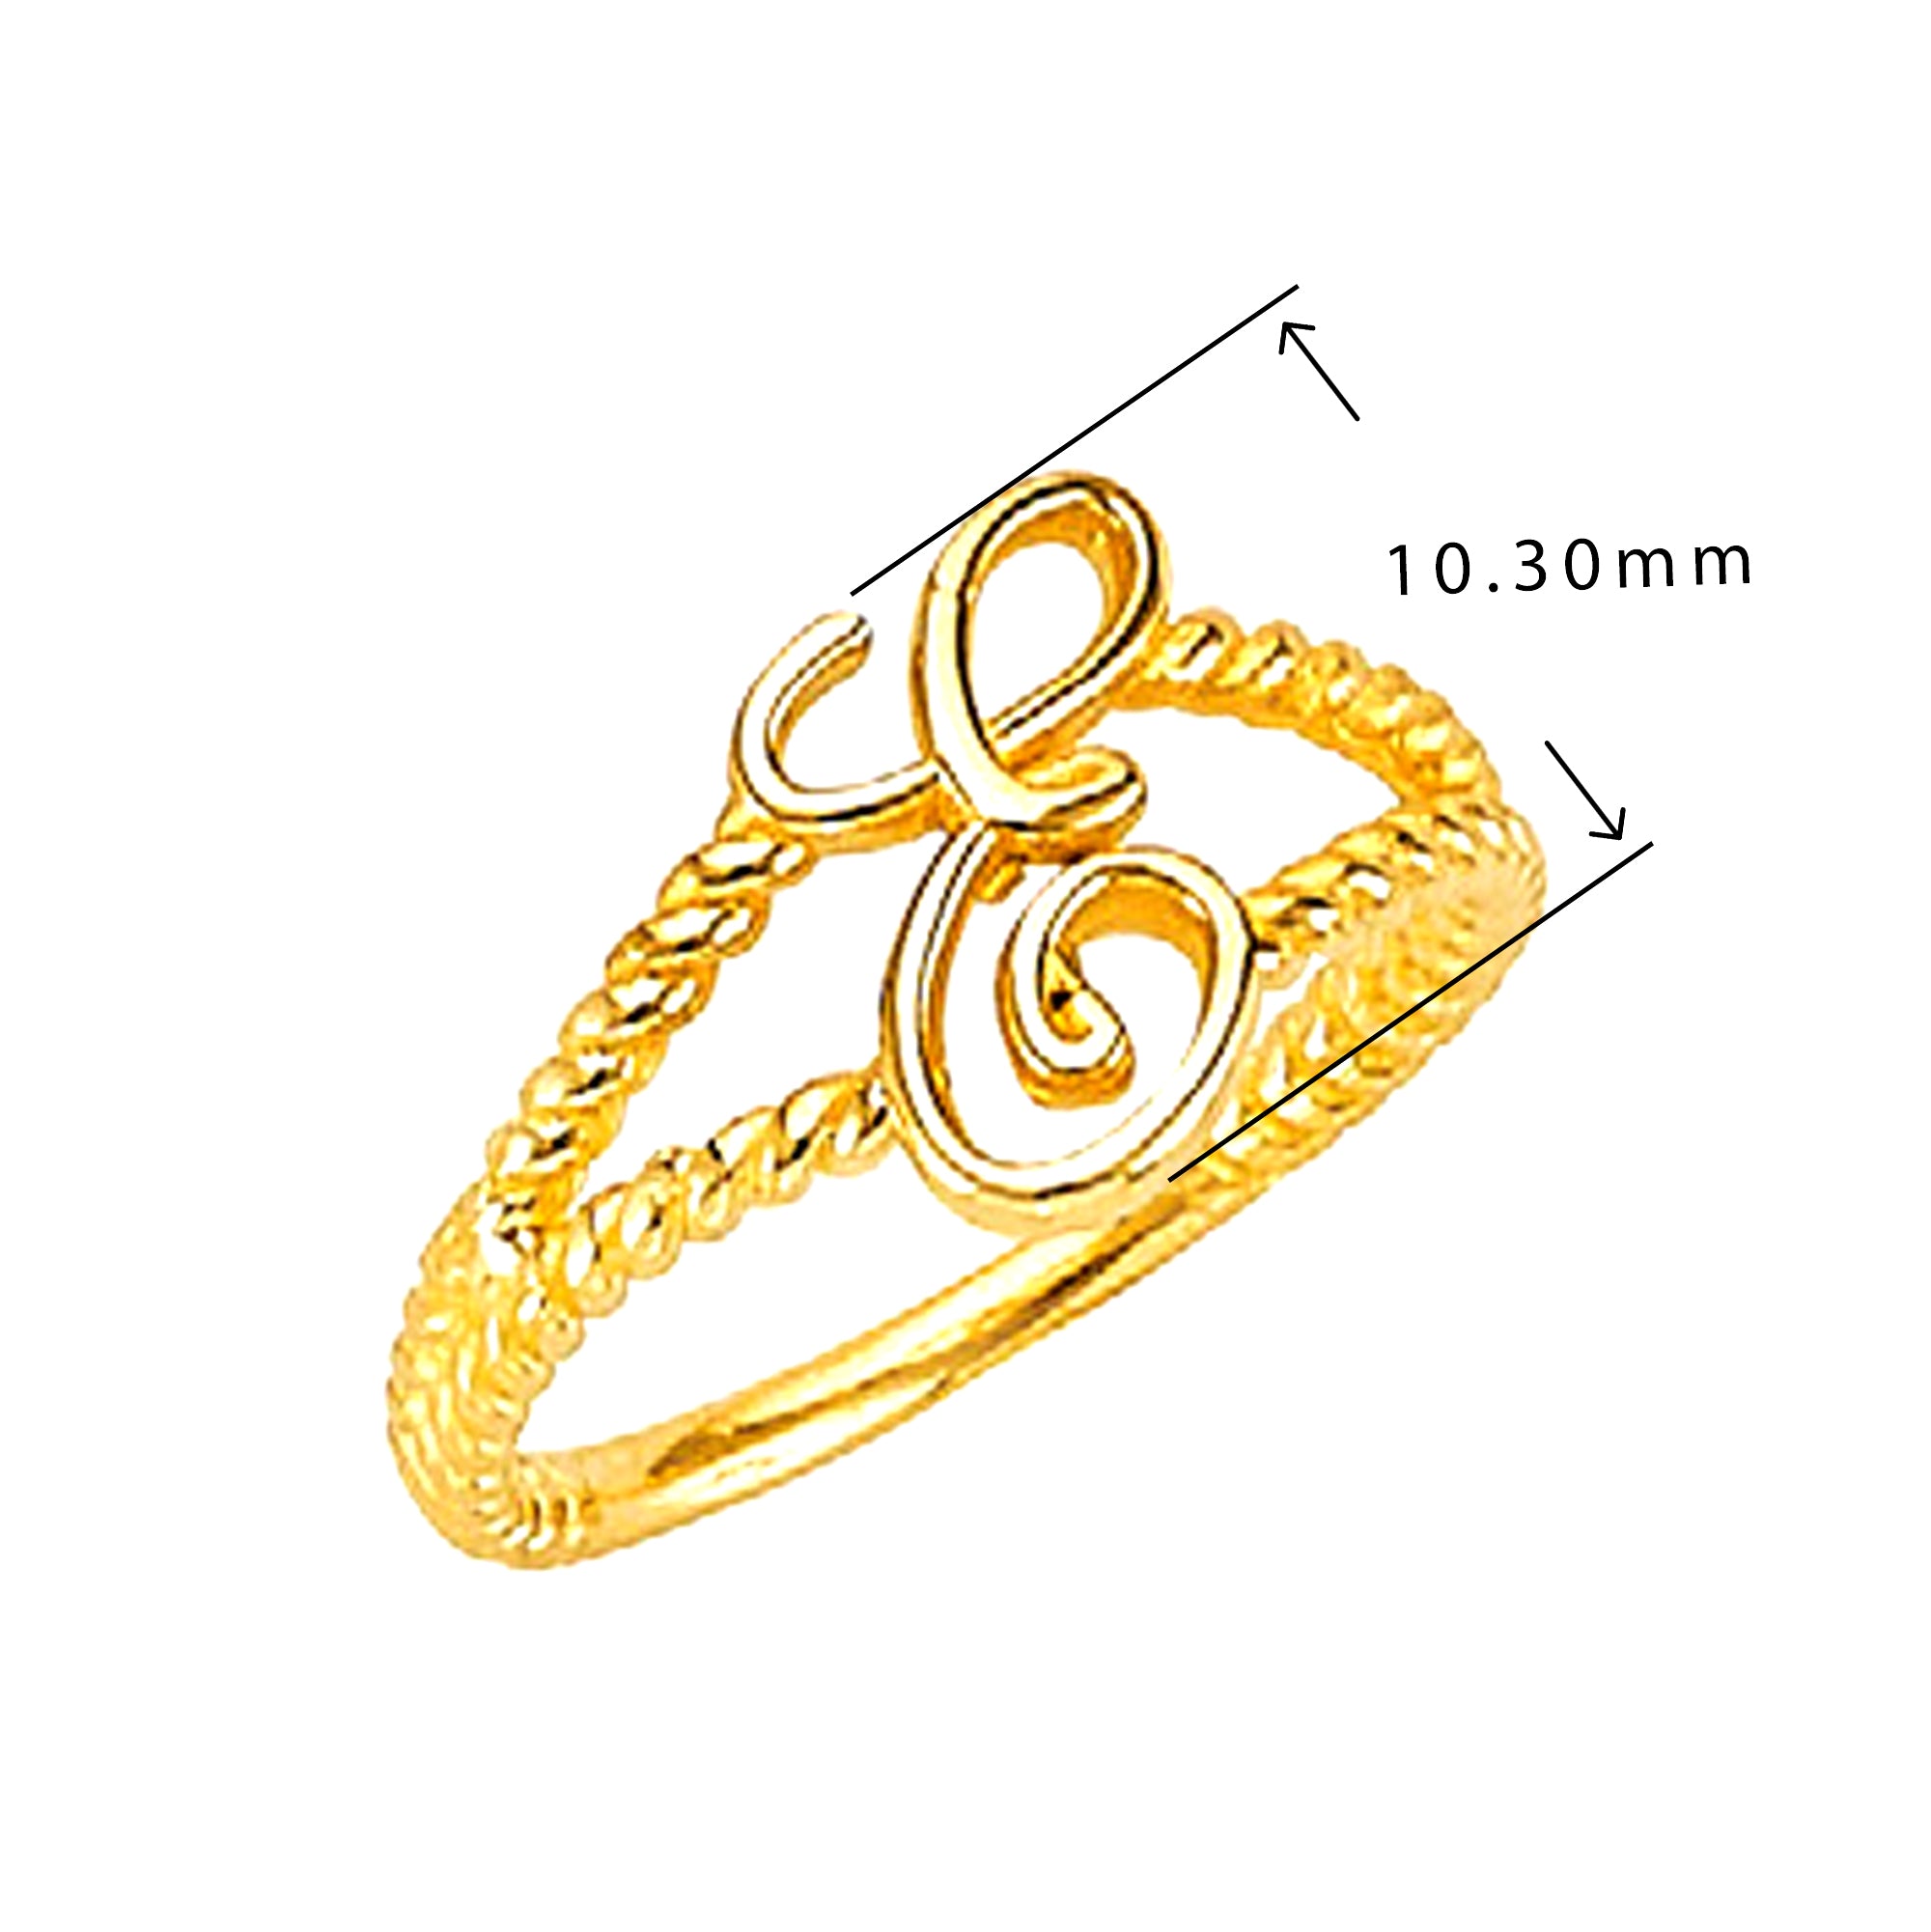 Yellow Gold Cursive Initial Rope Split Band Ring